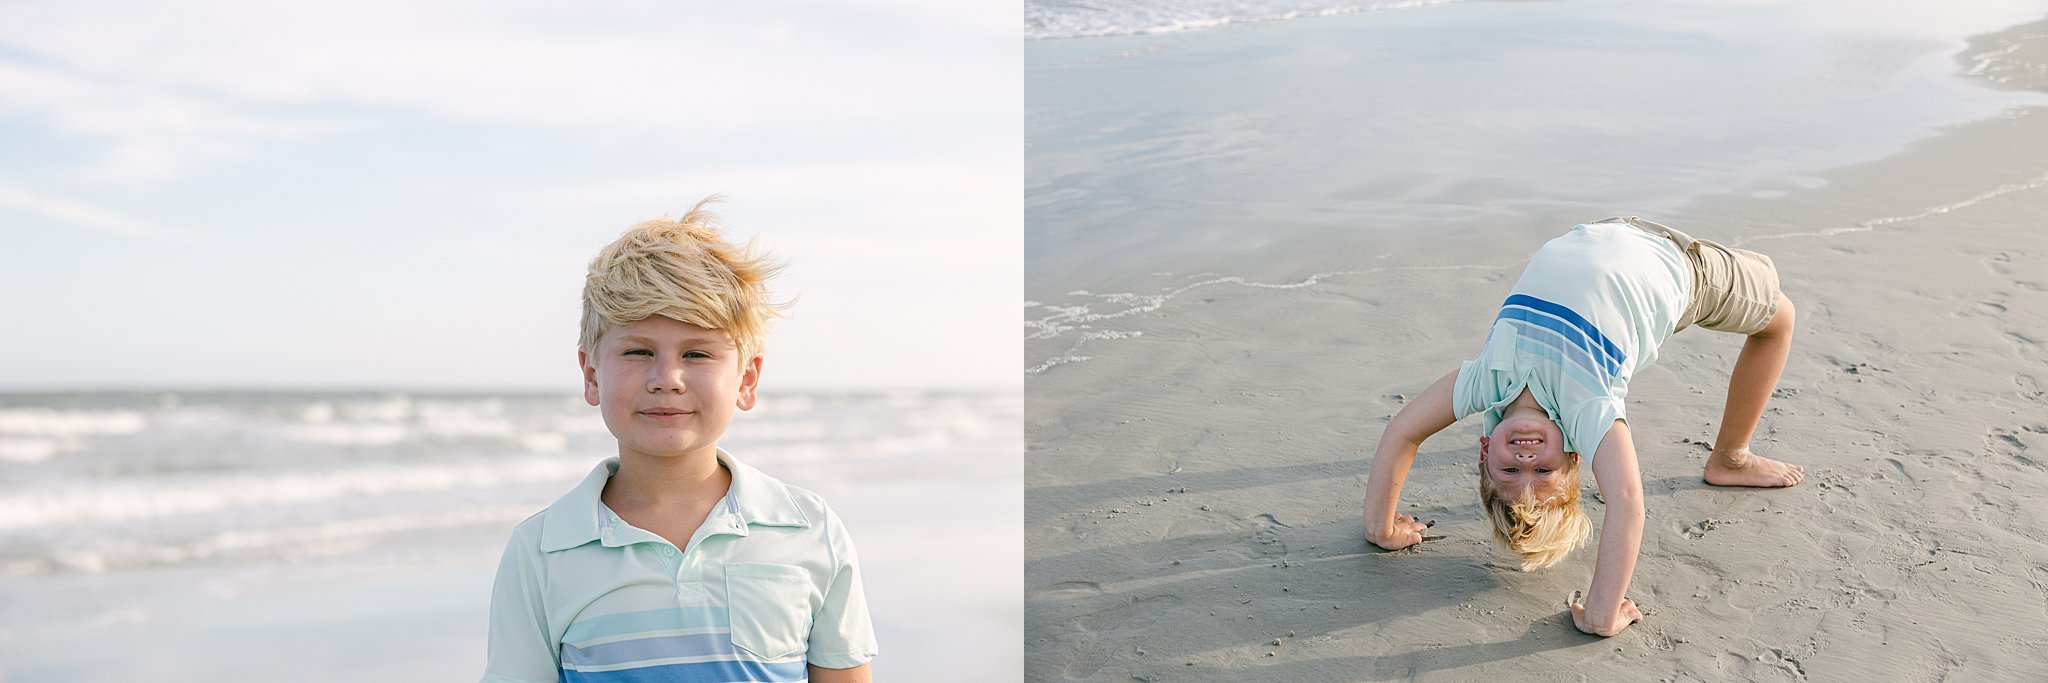 Katherine_Ives_Photography_Early_Hilton_Head_Extended_Family_Session_134.JPG